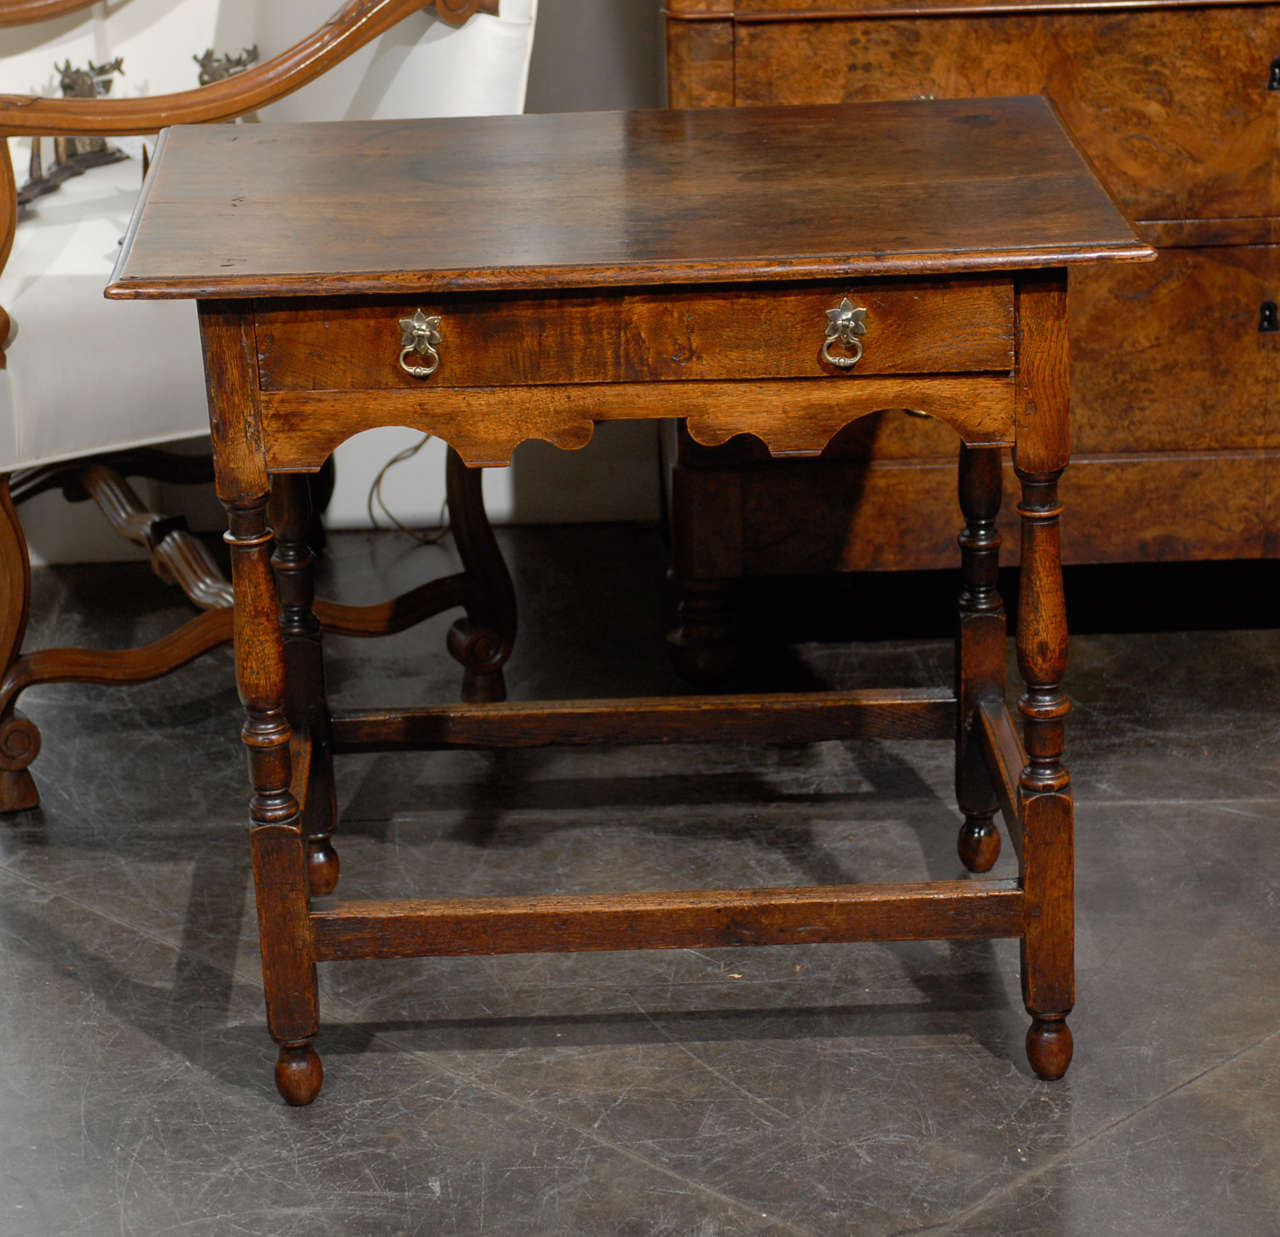 Early English side table with 1 drawer and stretcher.